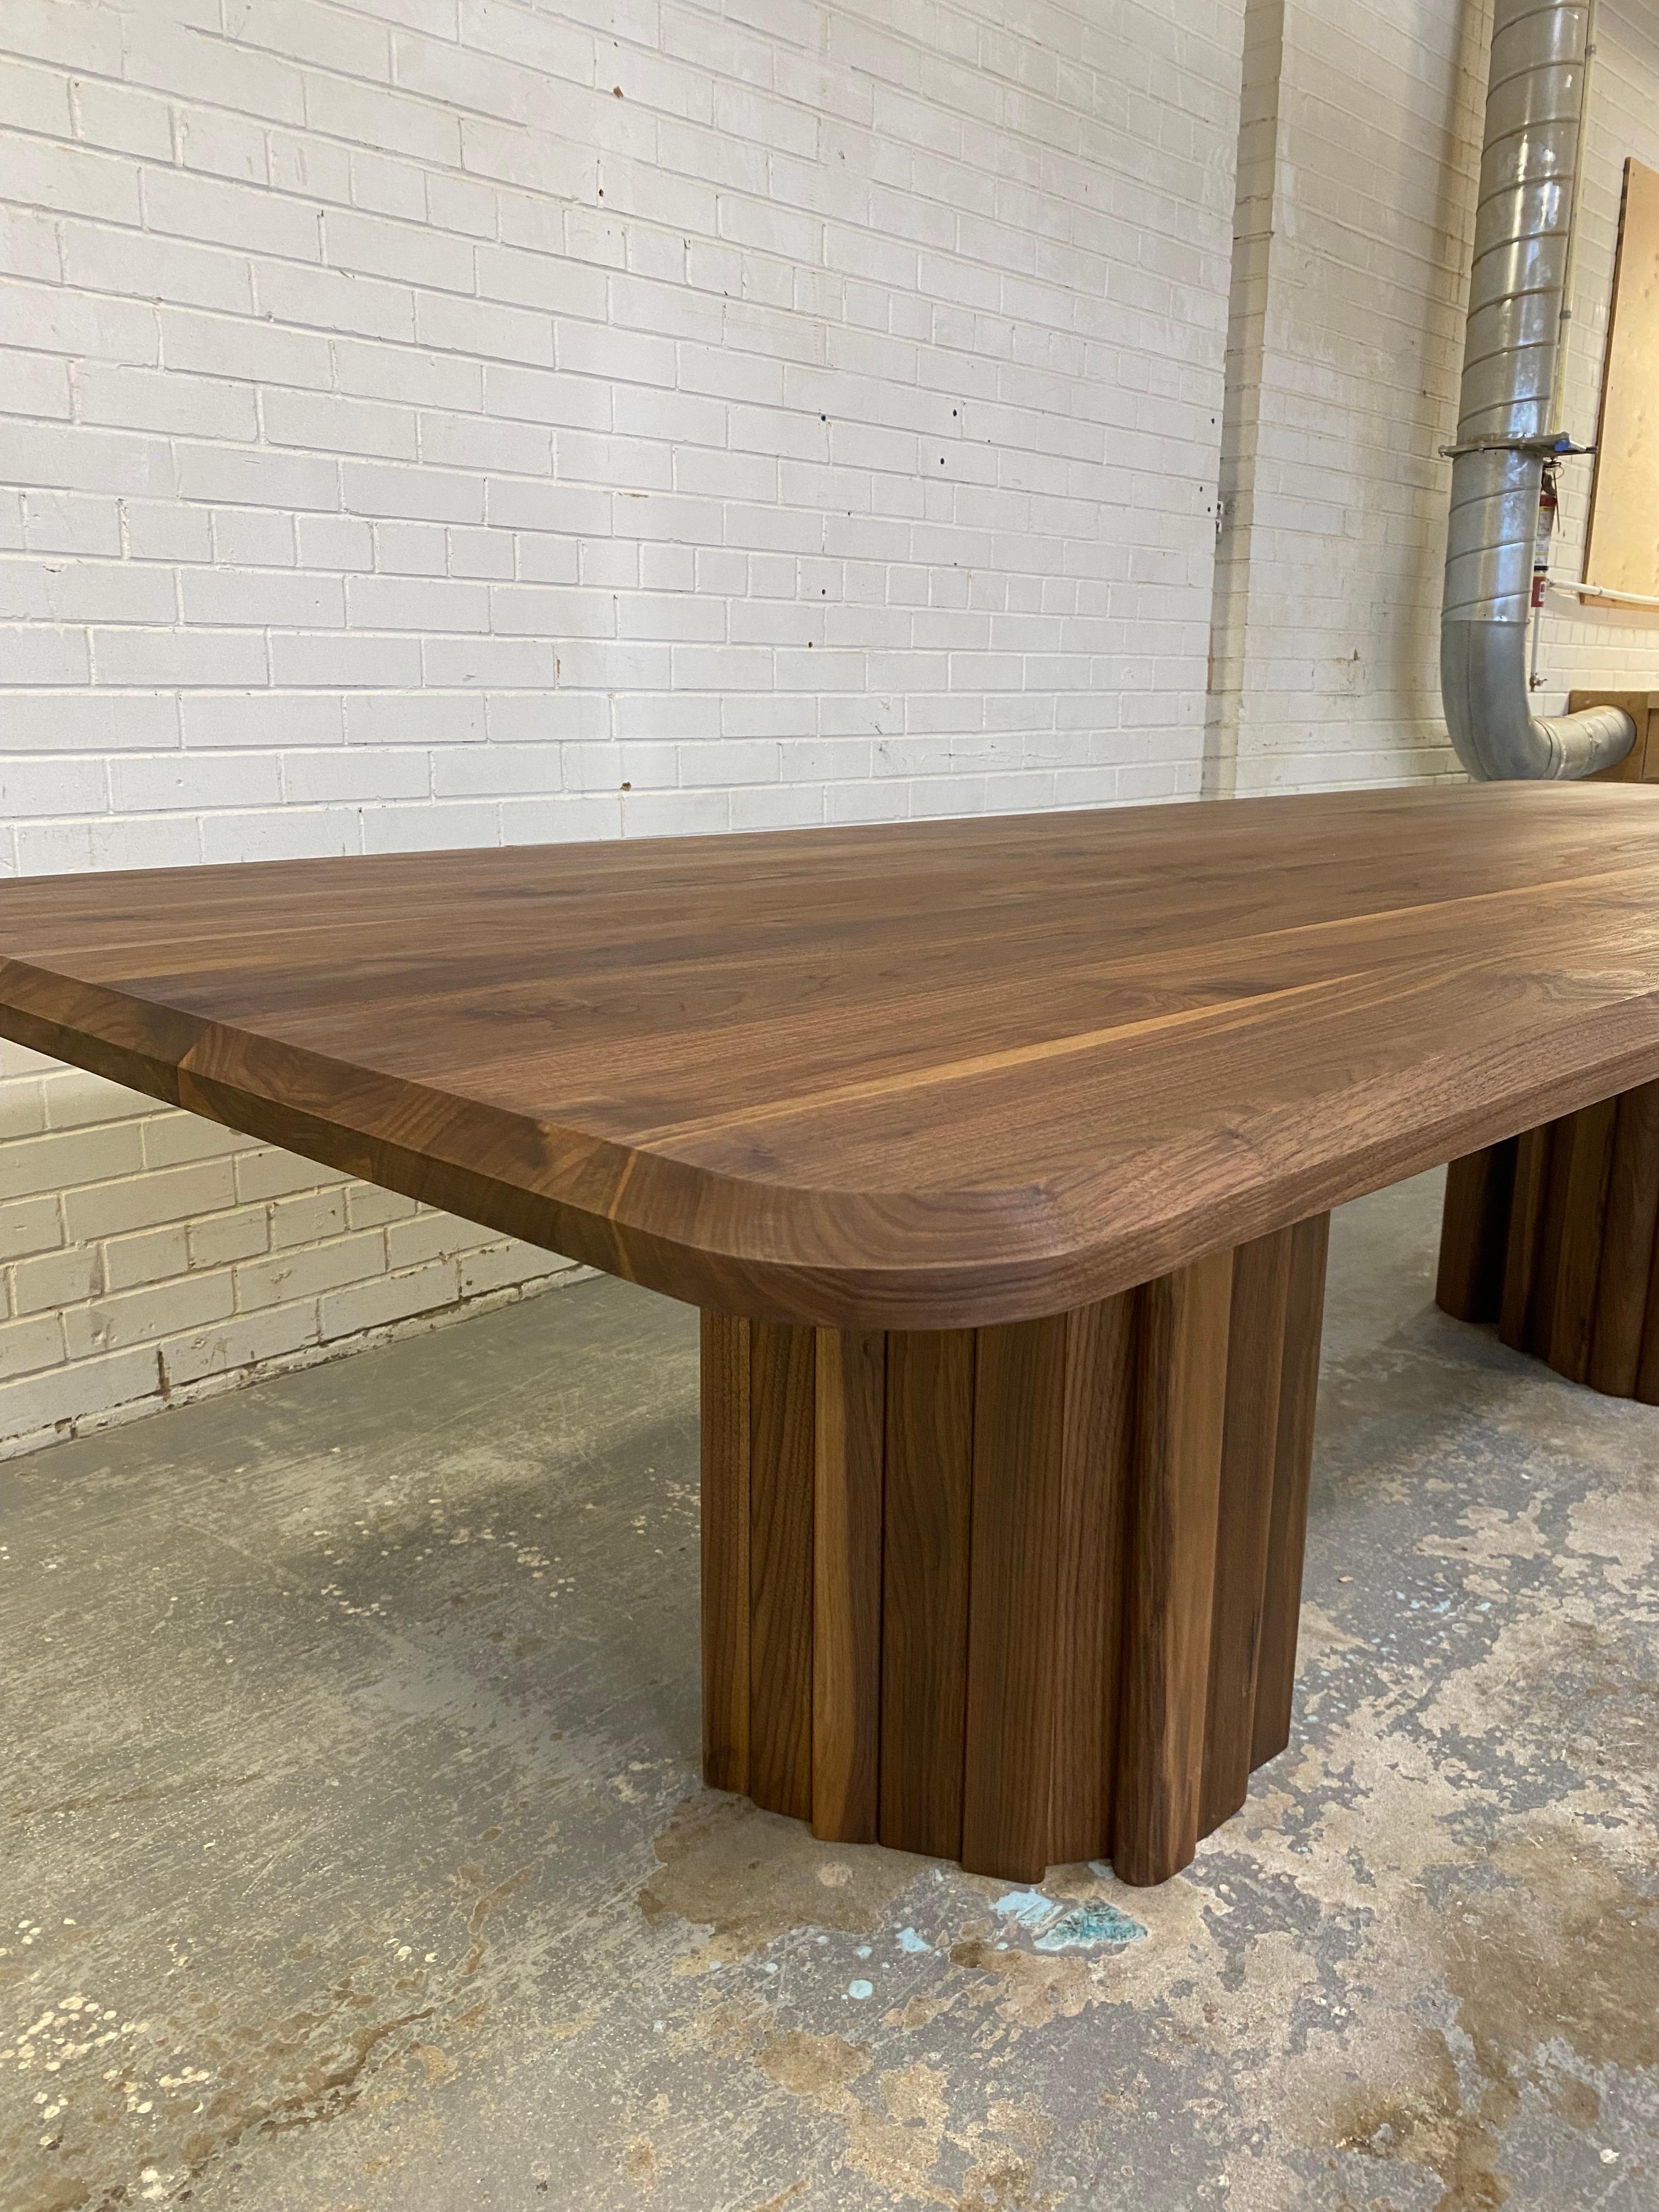 Organic Modern Handcrafted Oiled Walnut Geomorph Dining Table 96